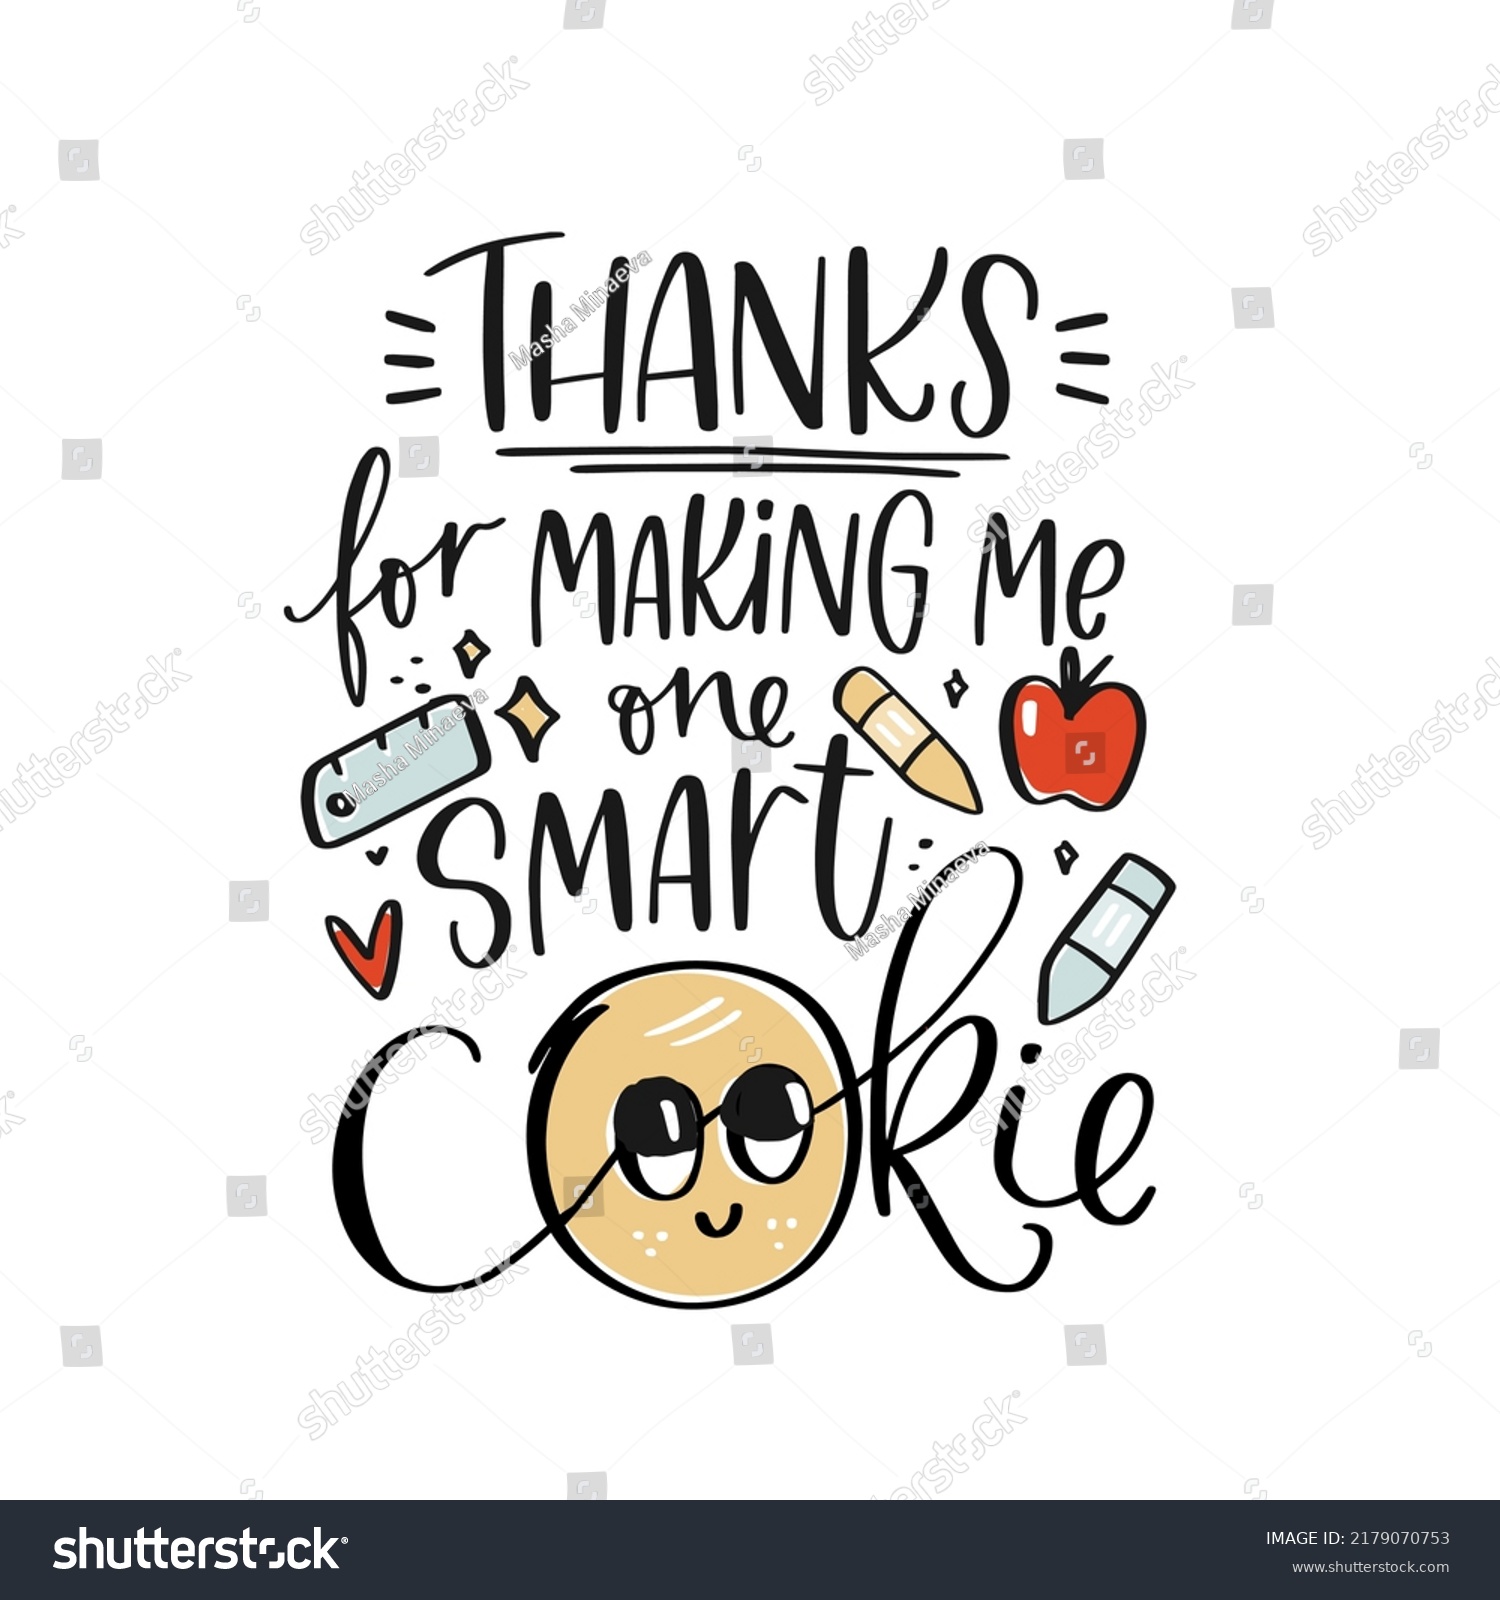 SVG of Kindergarten, pre-school teacher appreciation quote modern calligraphy cute design. Thanks for making me one smart cookie gratitude phrase for graduation party, Back to school or Teacher's day. svg